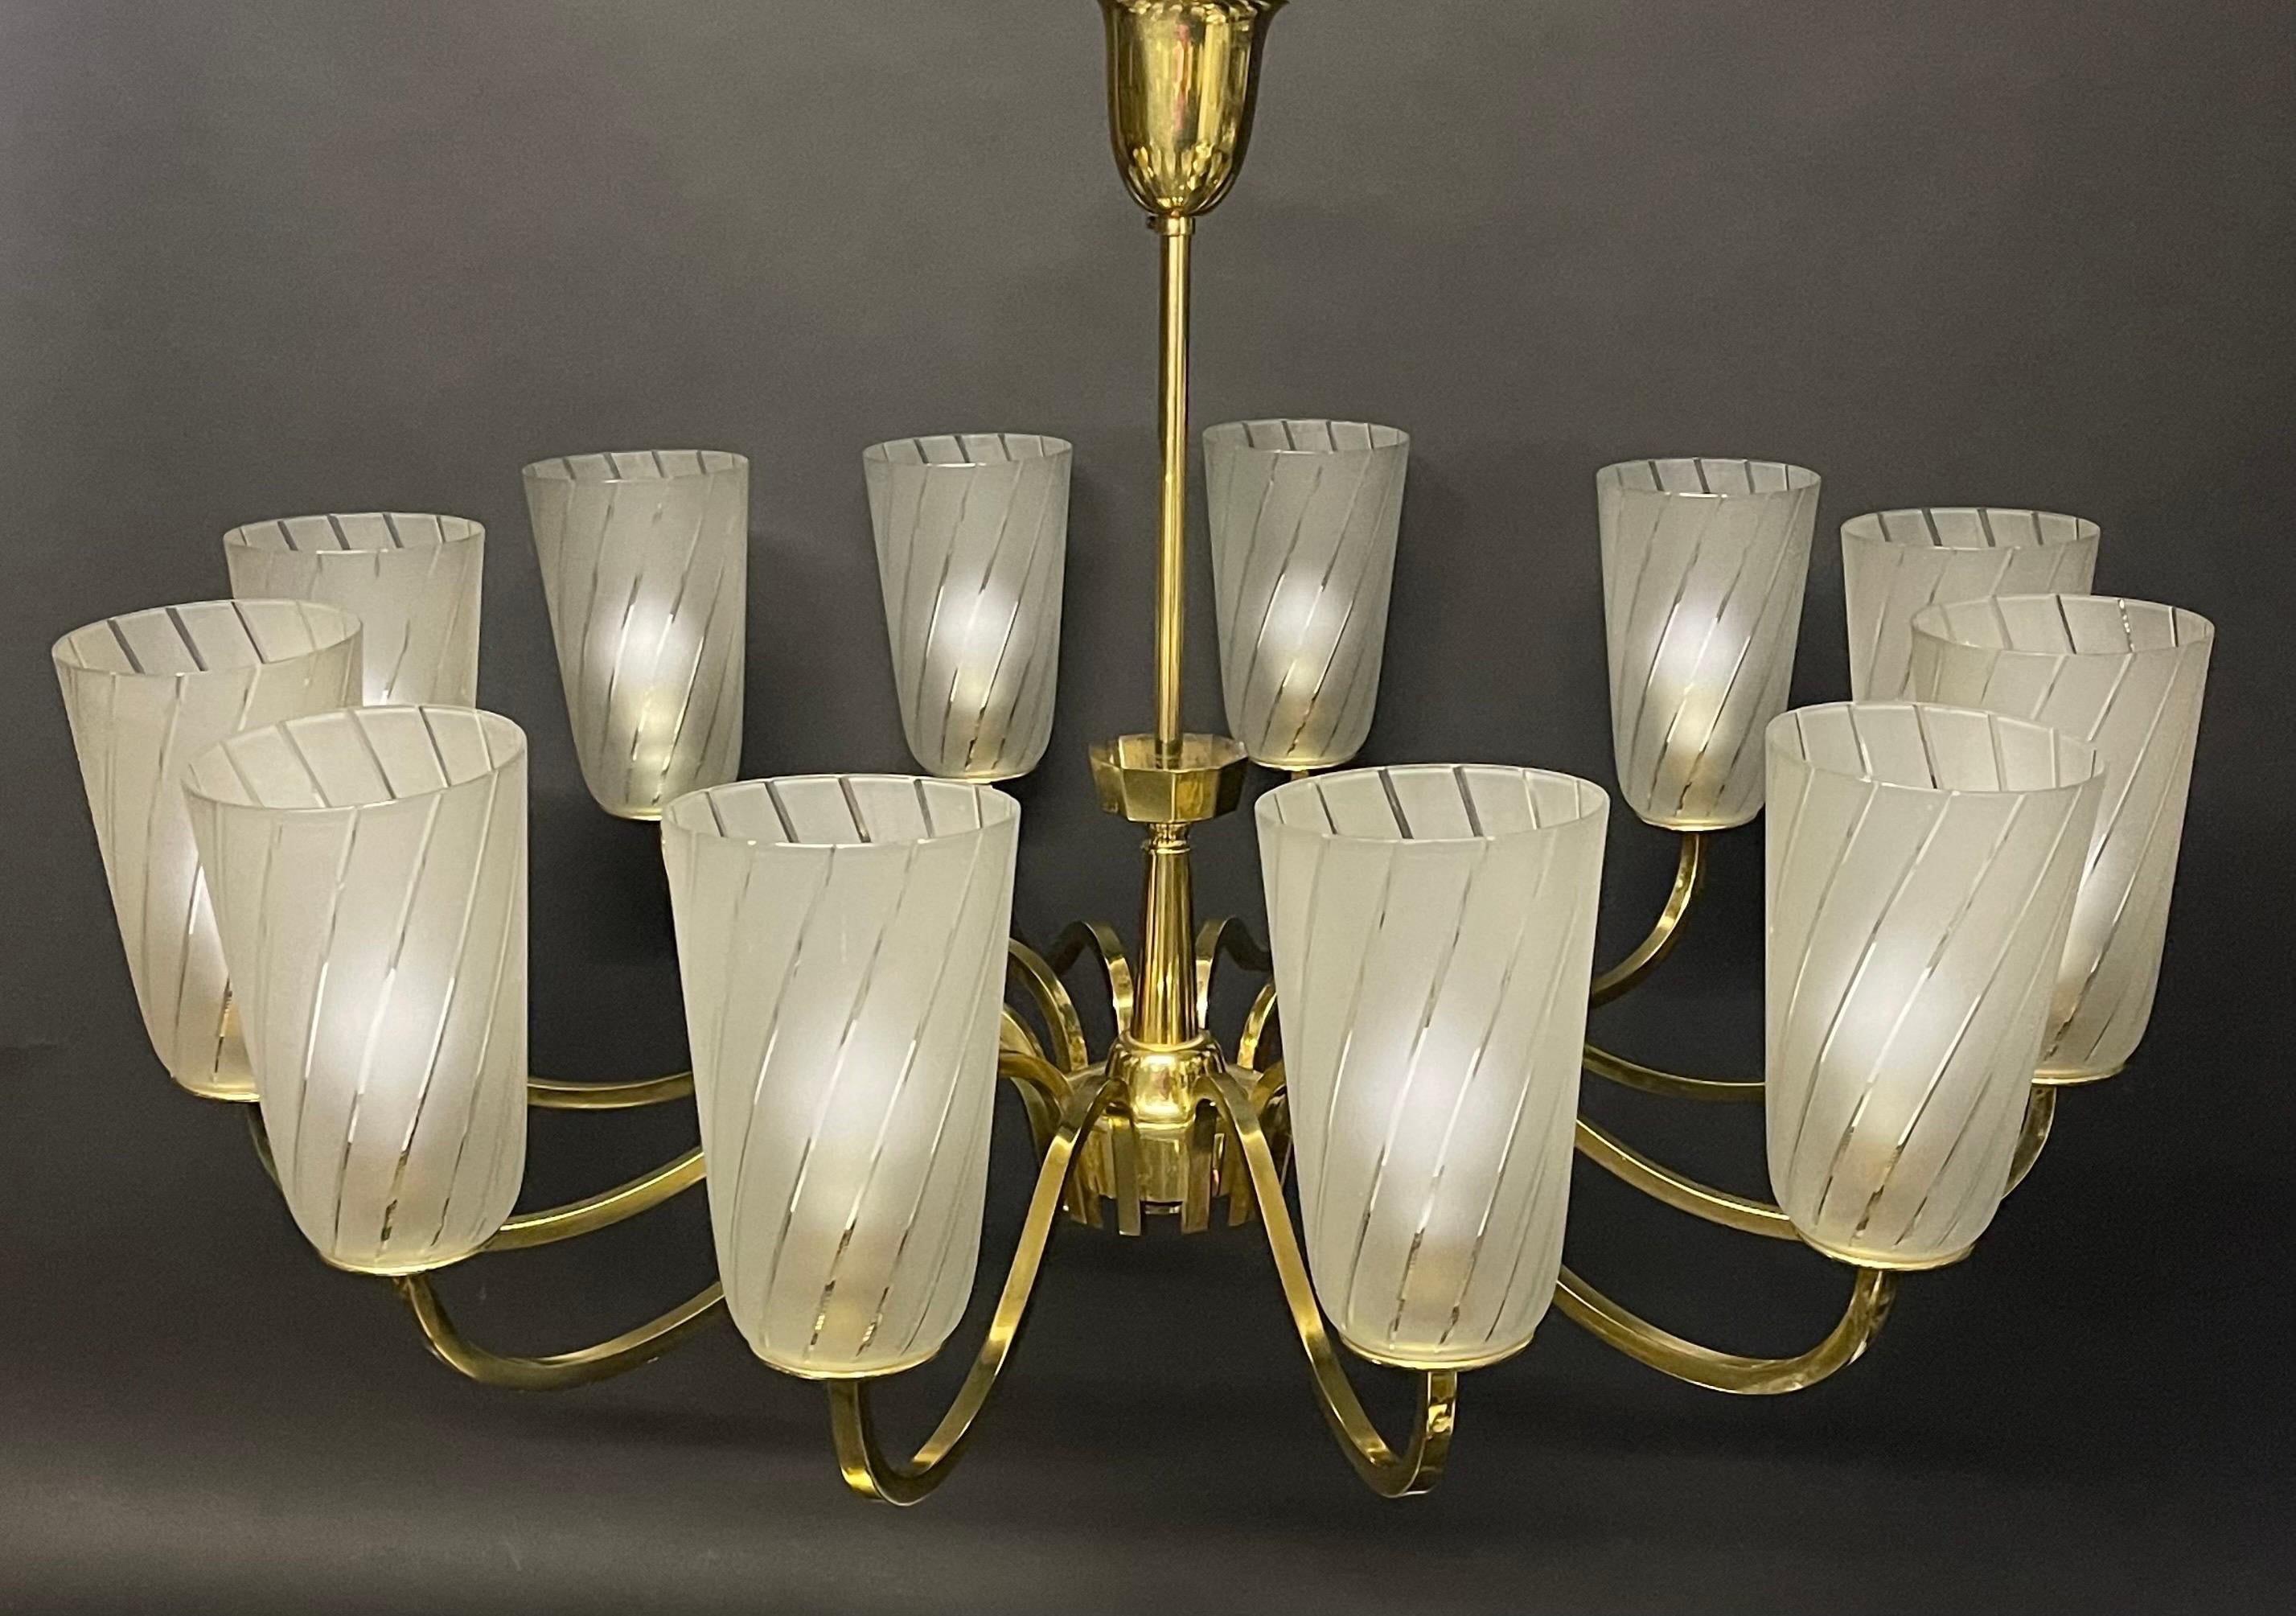 Huge German Art Deco Polished Brass and Frosted Glass Chandelier, 1940s For Sale 4